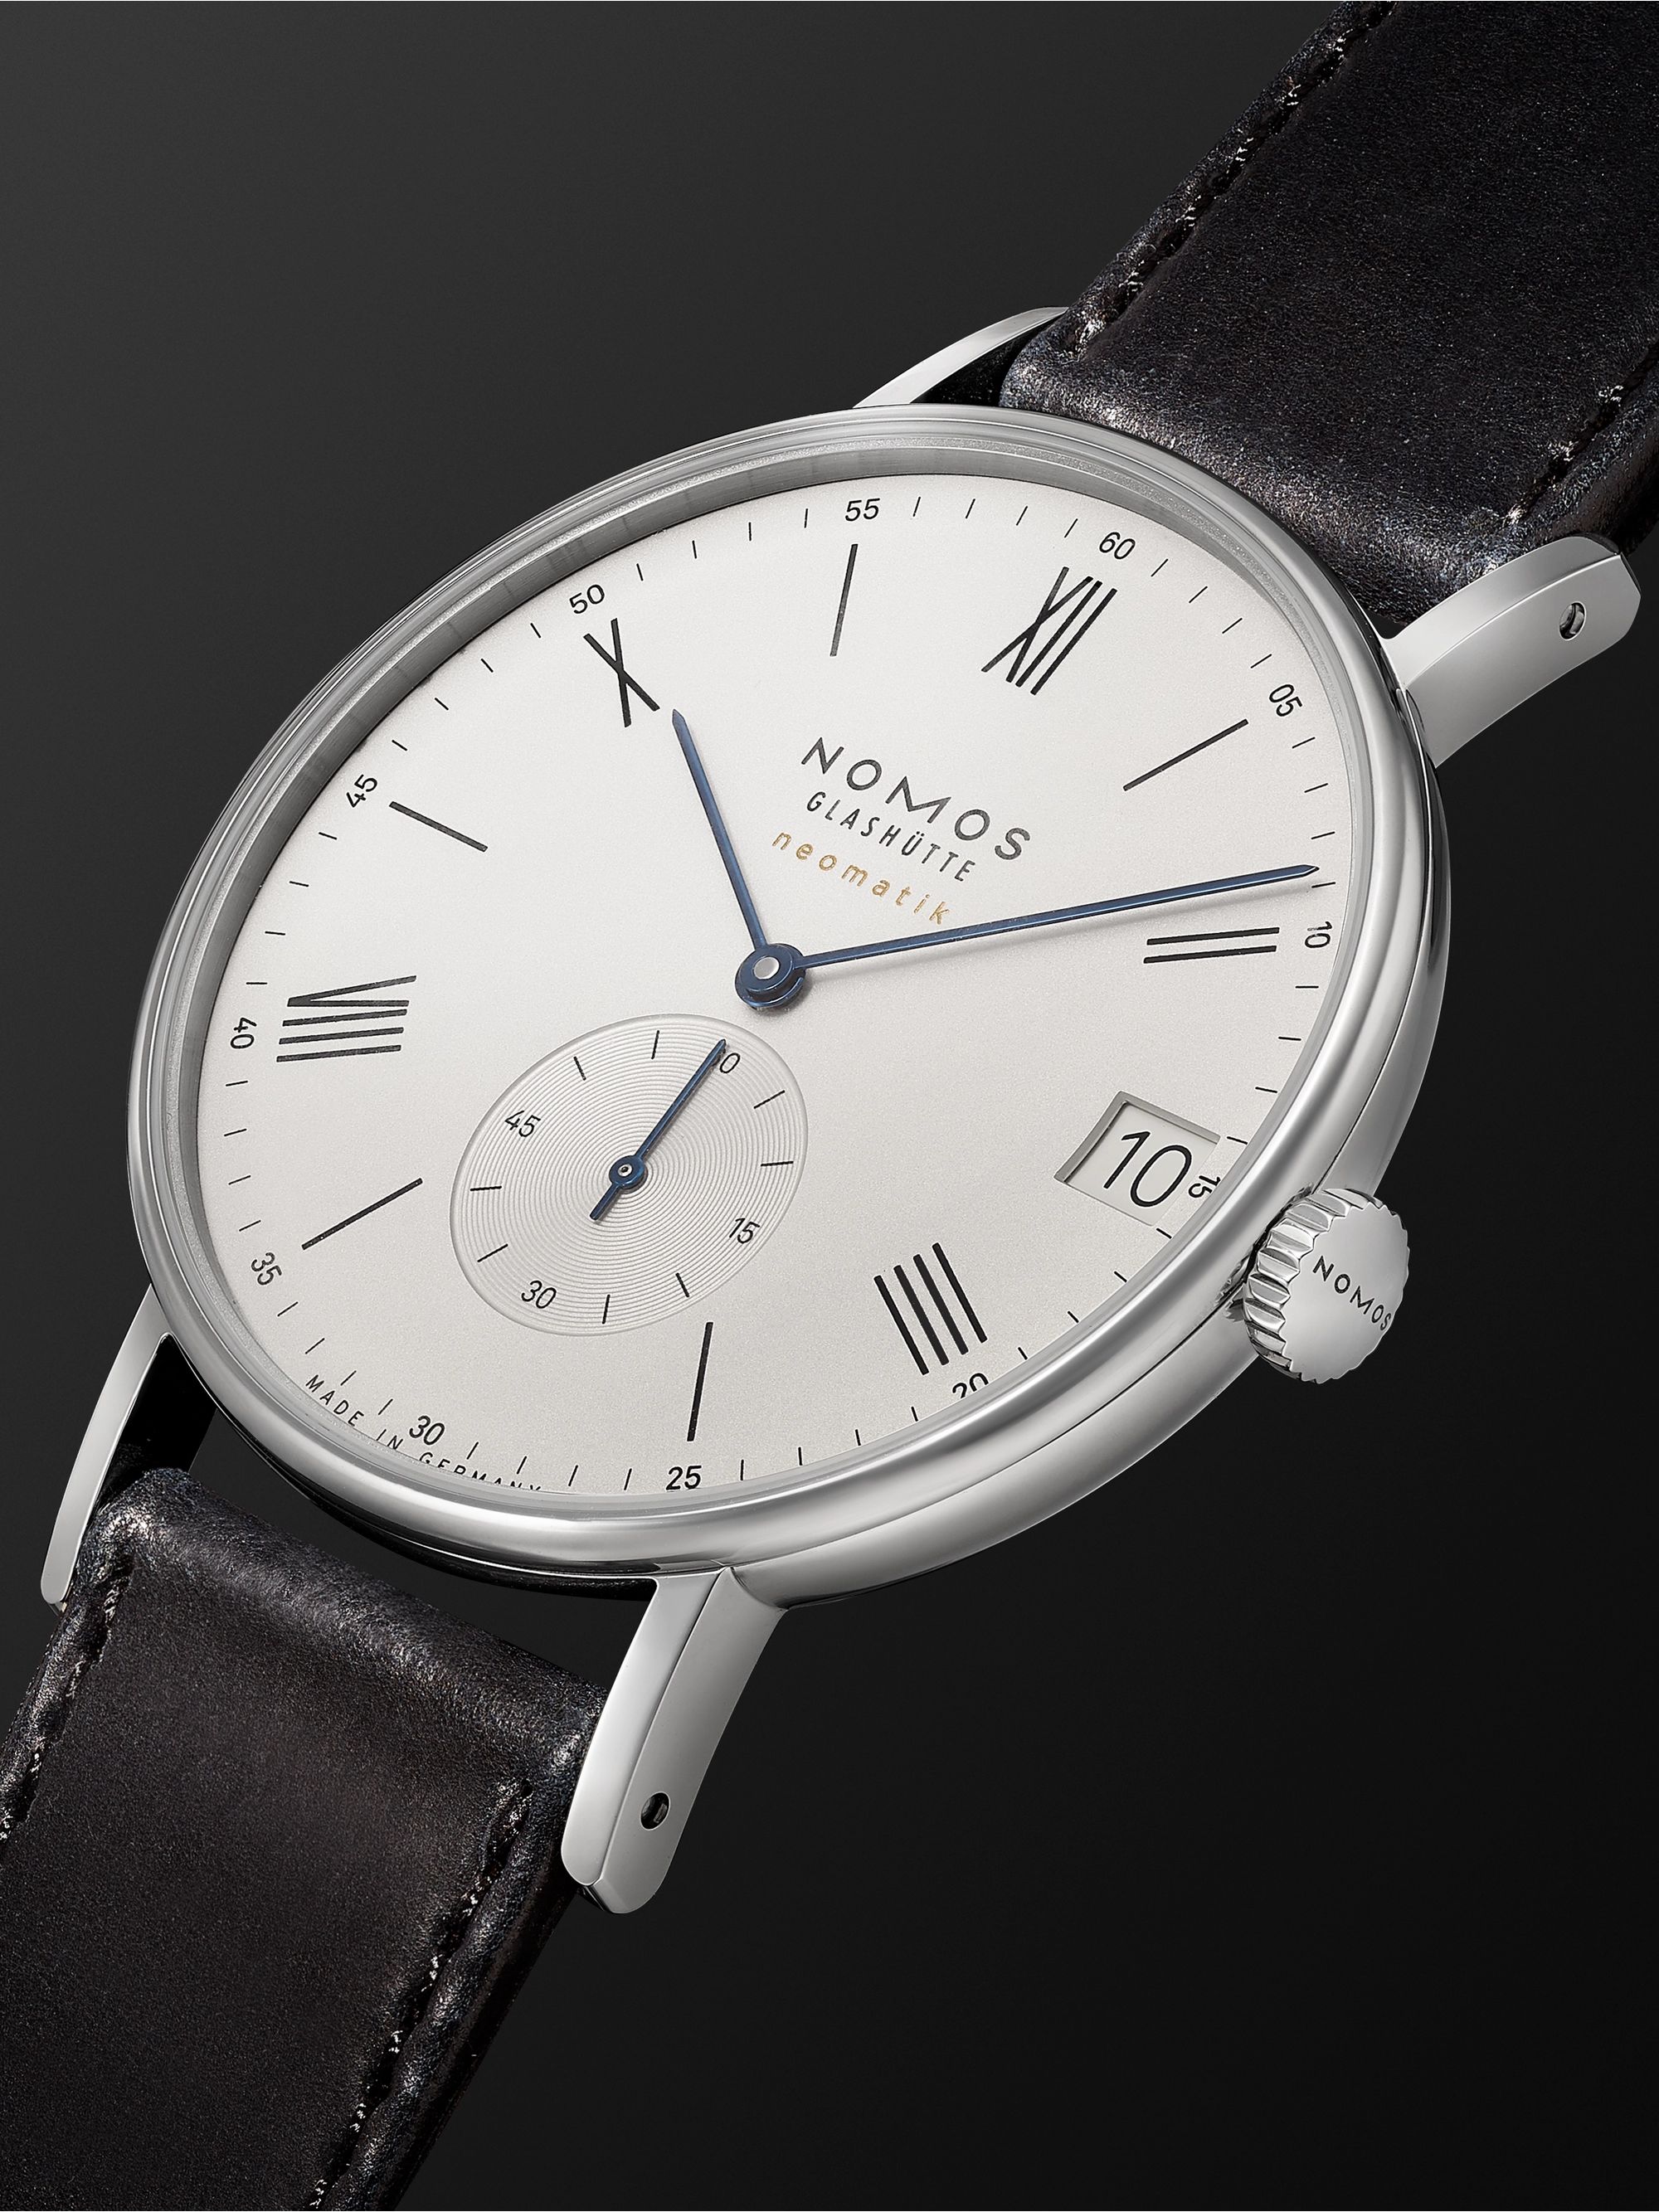 NOMOS GLASHÜTTE Ludwig Neomatik 41 Limited Edition Automatic 40.5mm Stainless Steel and Leather Watch, Ref. No. 291